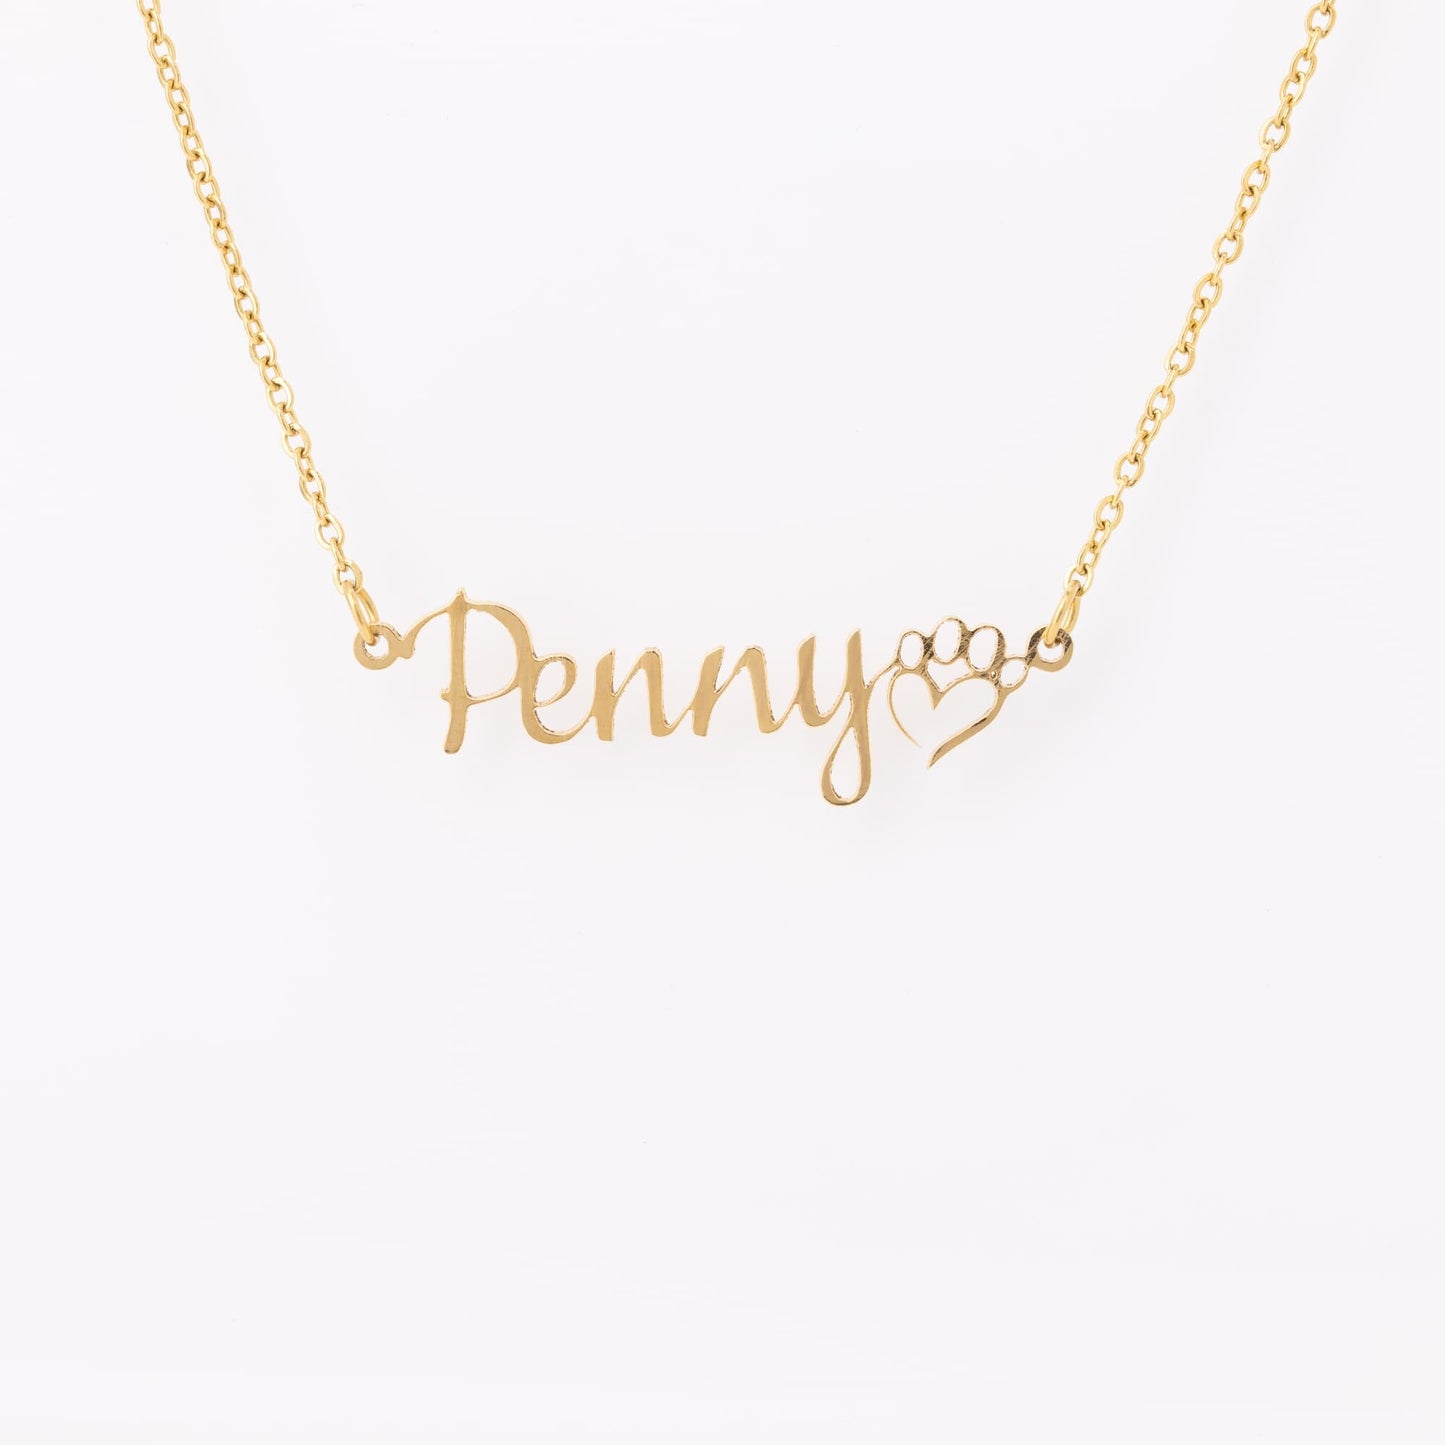 Personalized Name Dog Mom Necklace  | Custom Name Necklace, Script Necklace, Gifts for Dog Moms, Pet Lover Gifts